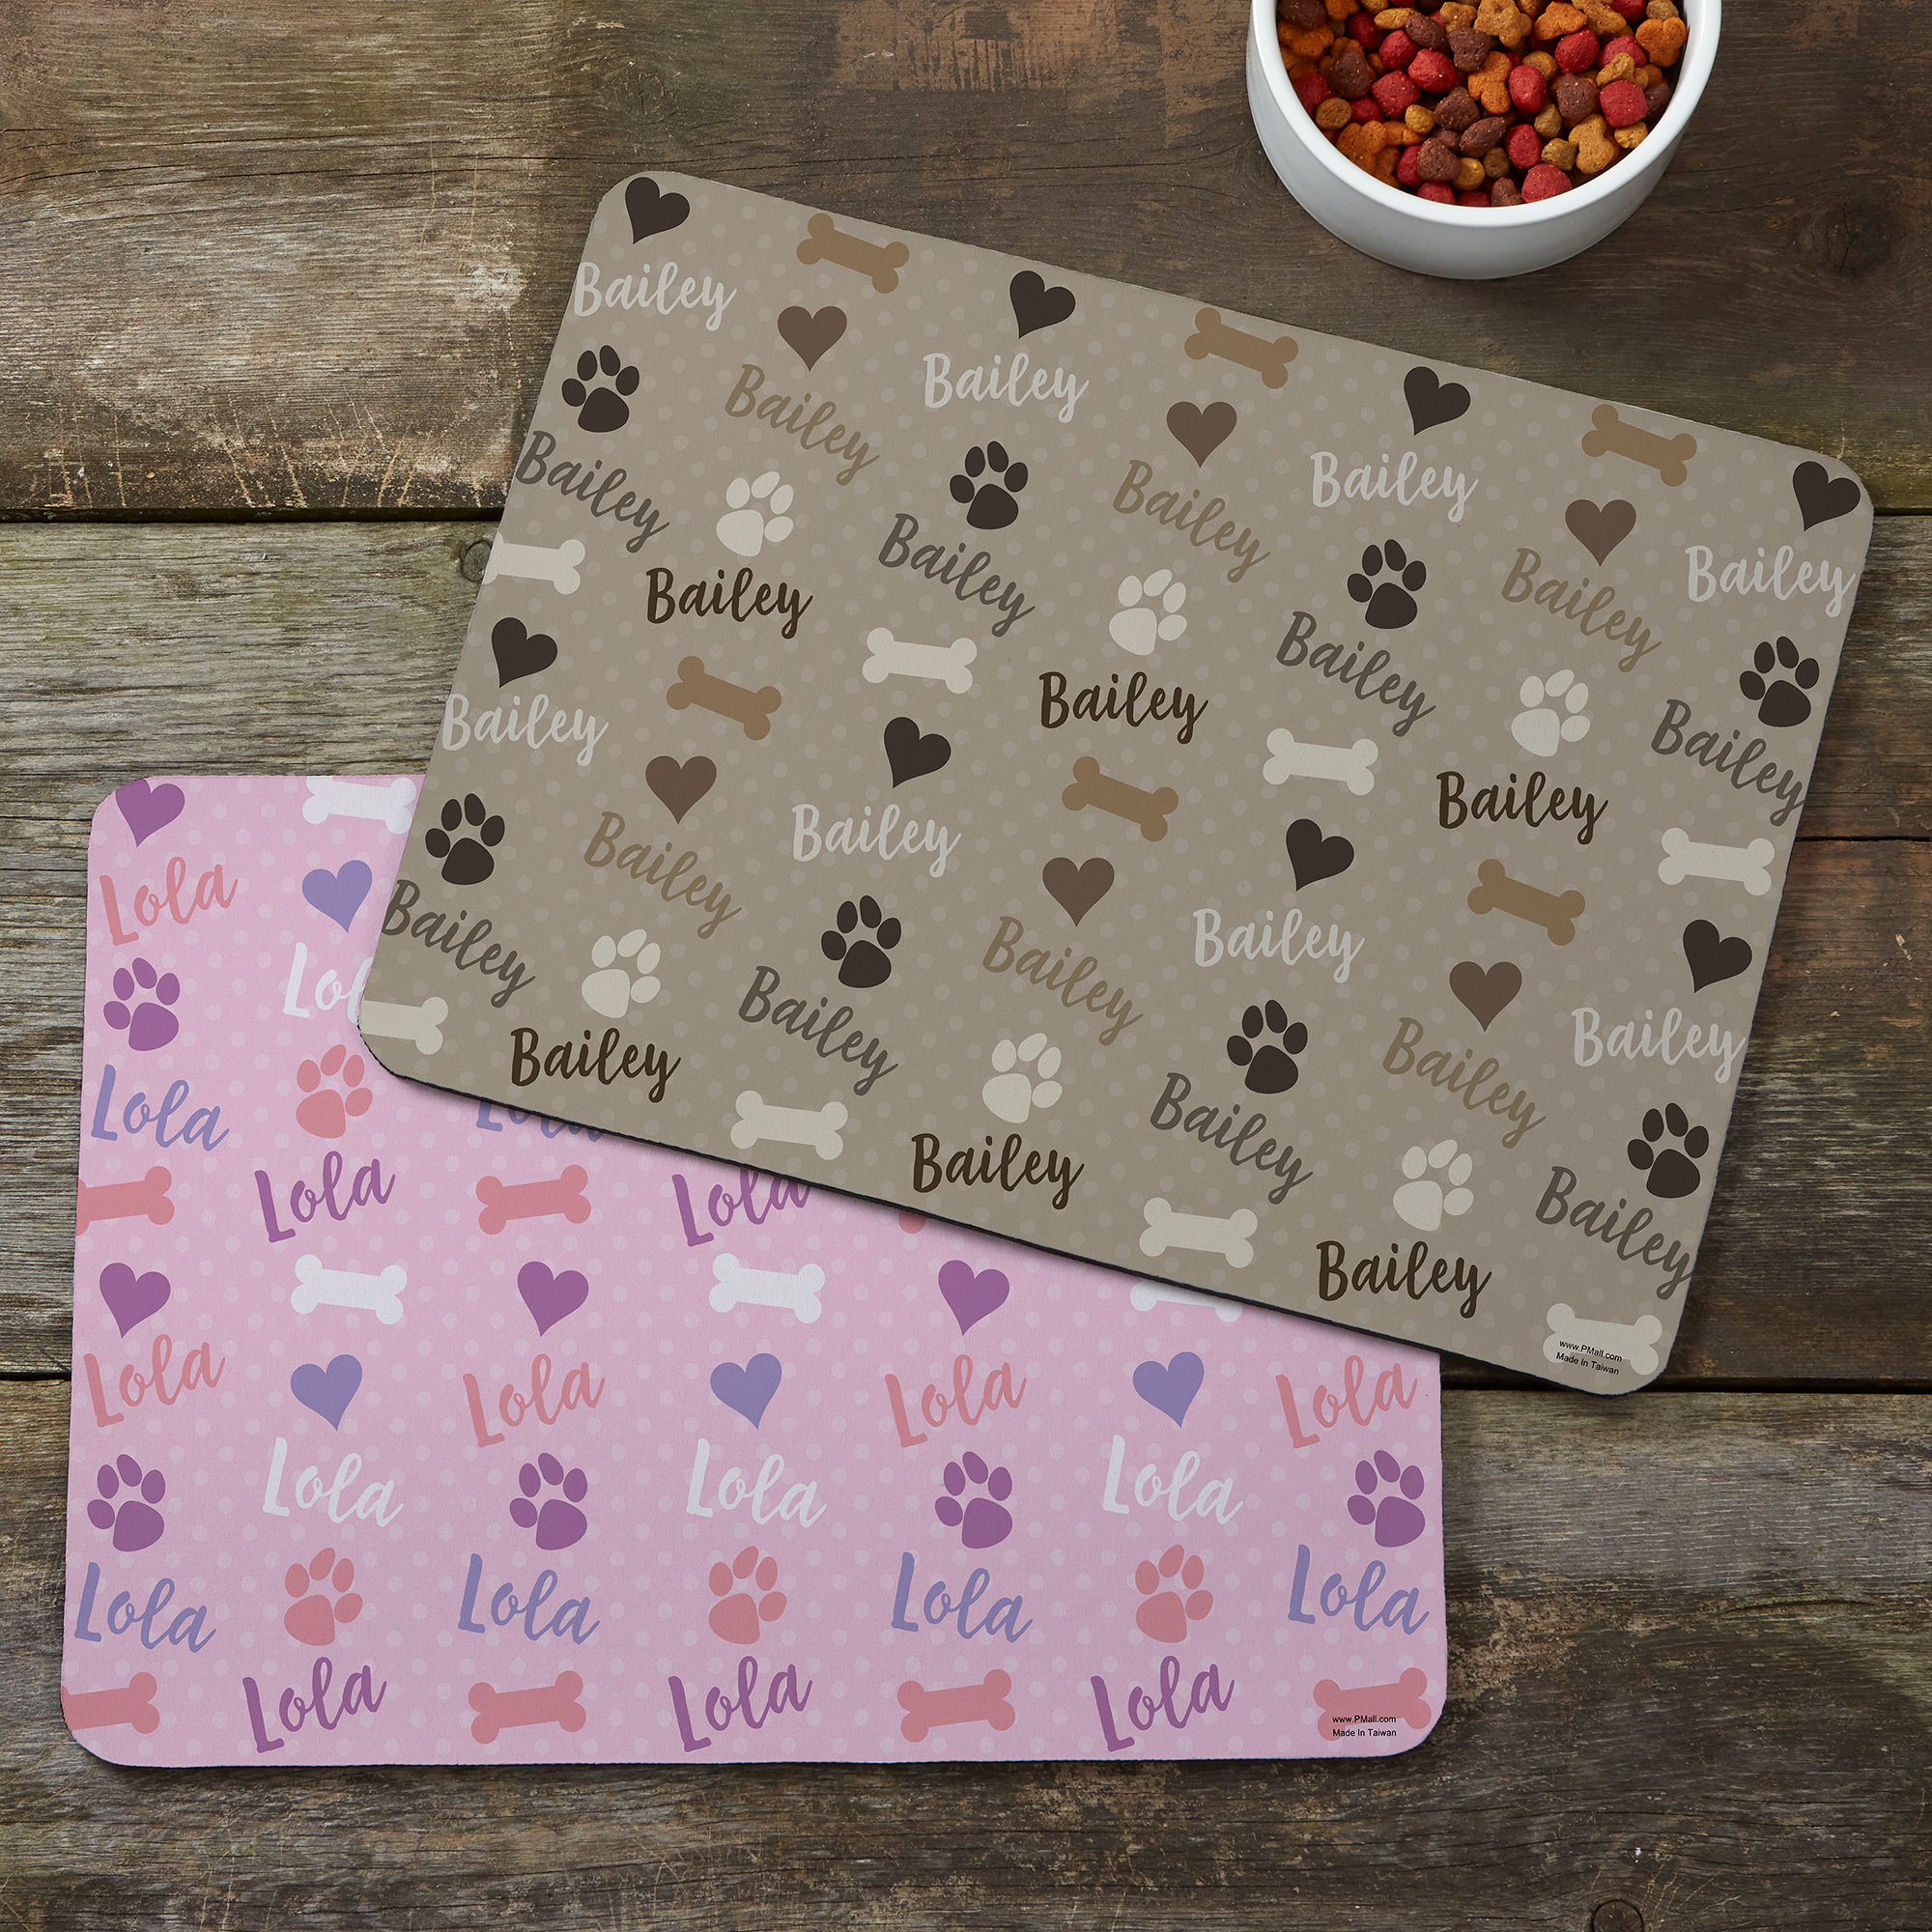 Custom Dog Food Mats - Small, Design & Preview Online